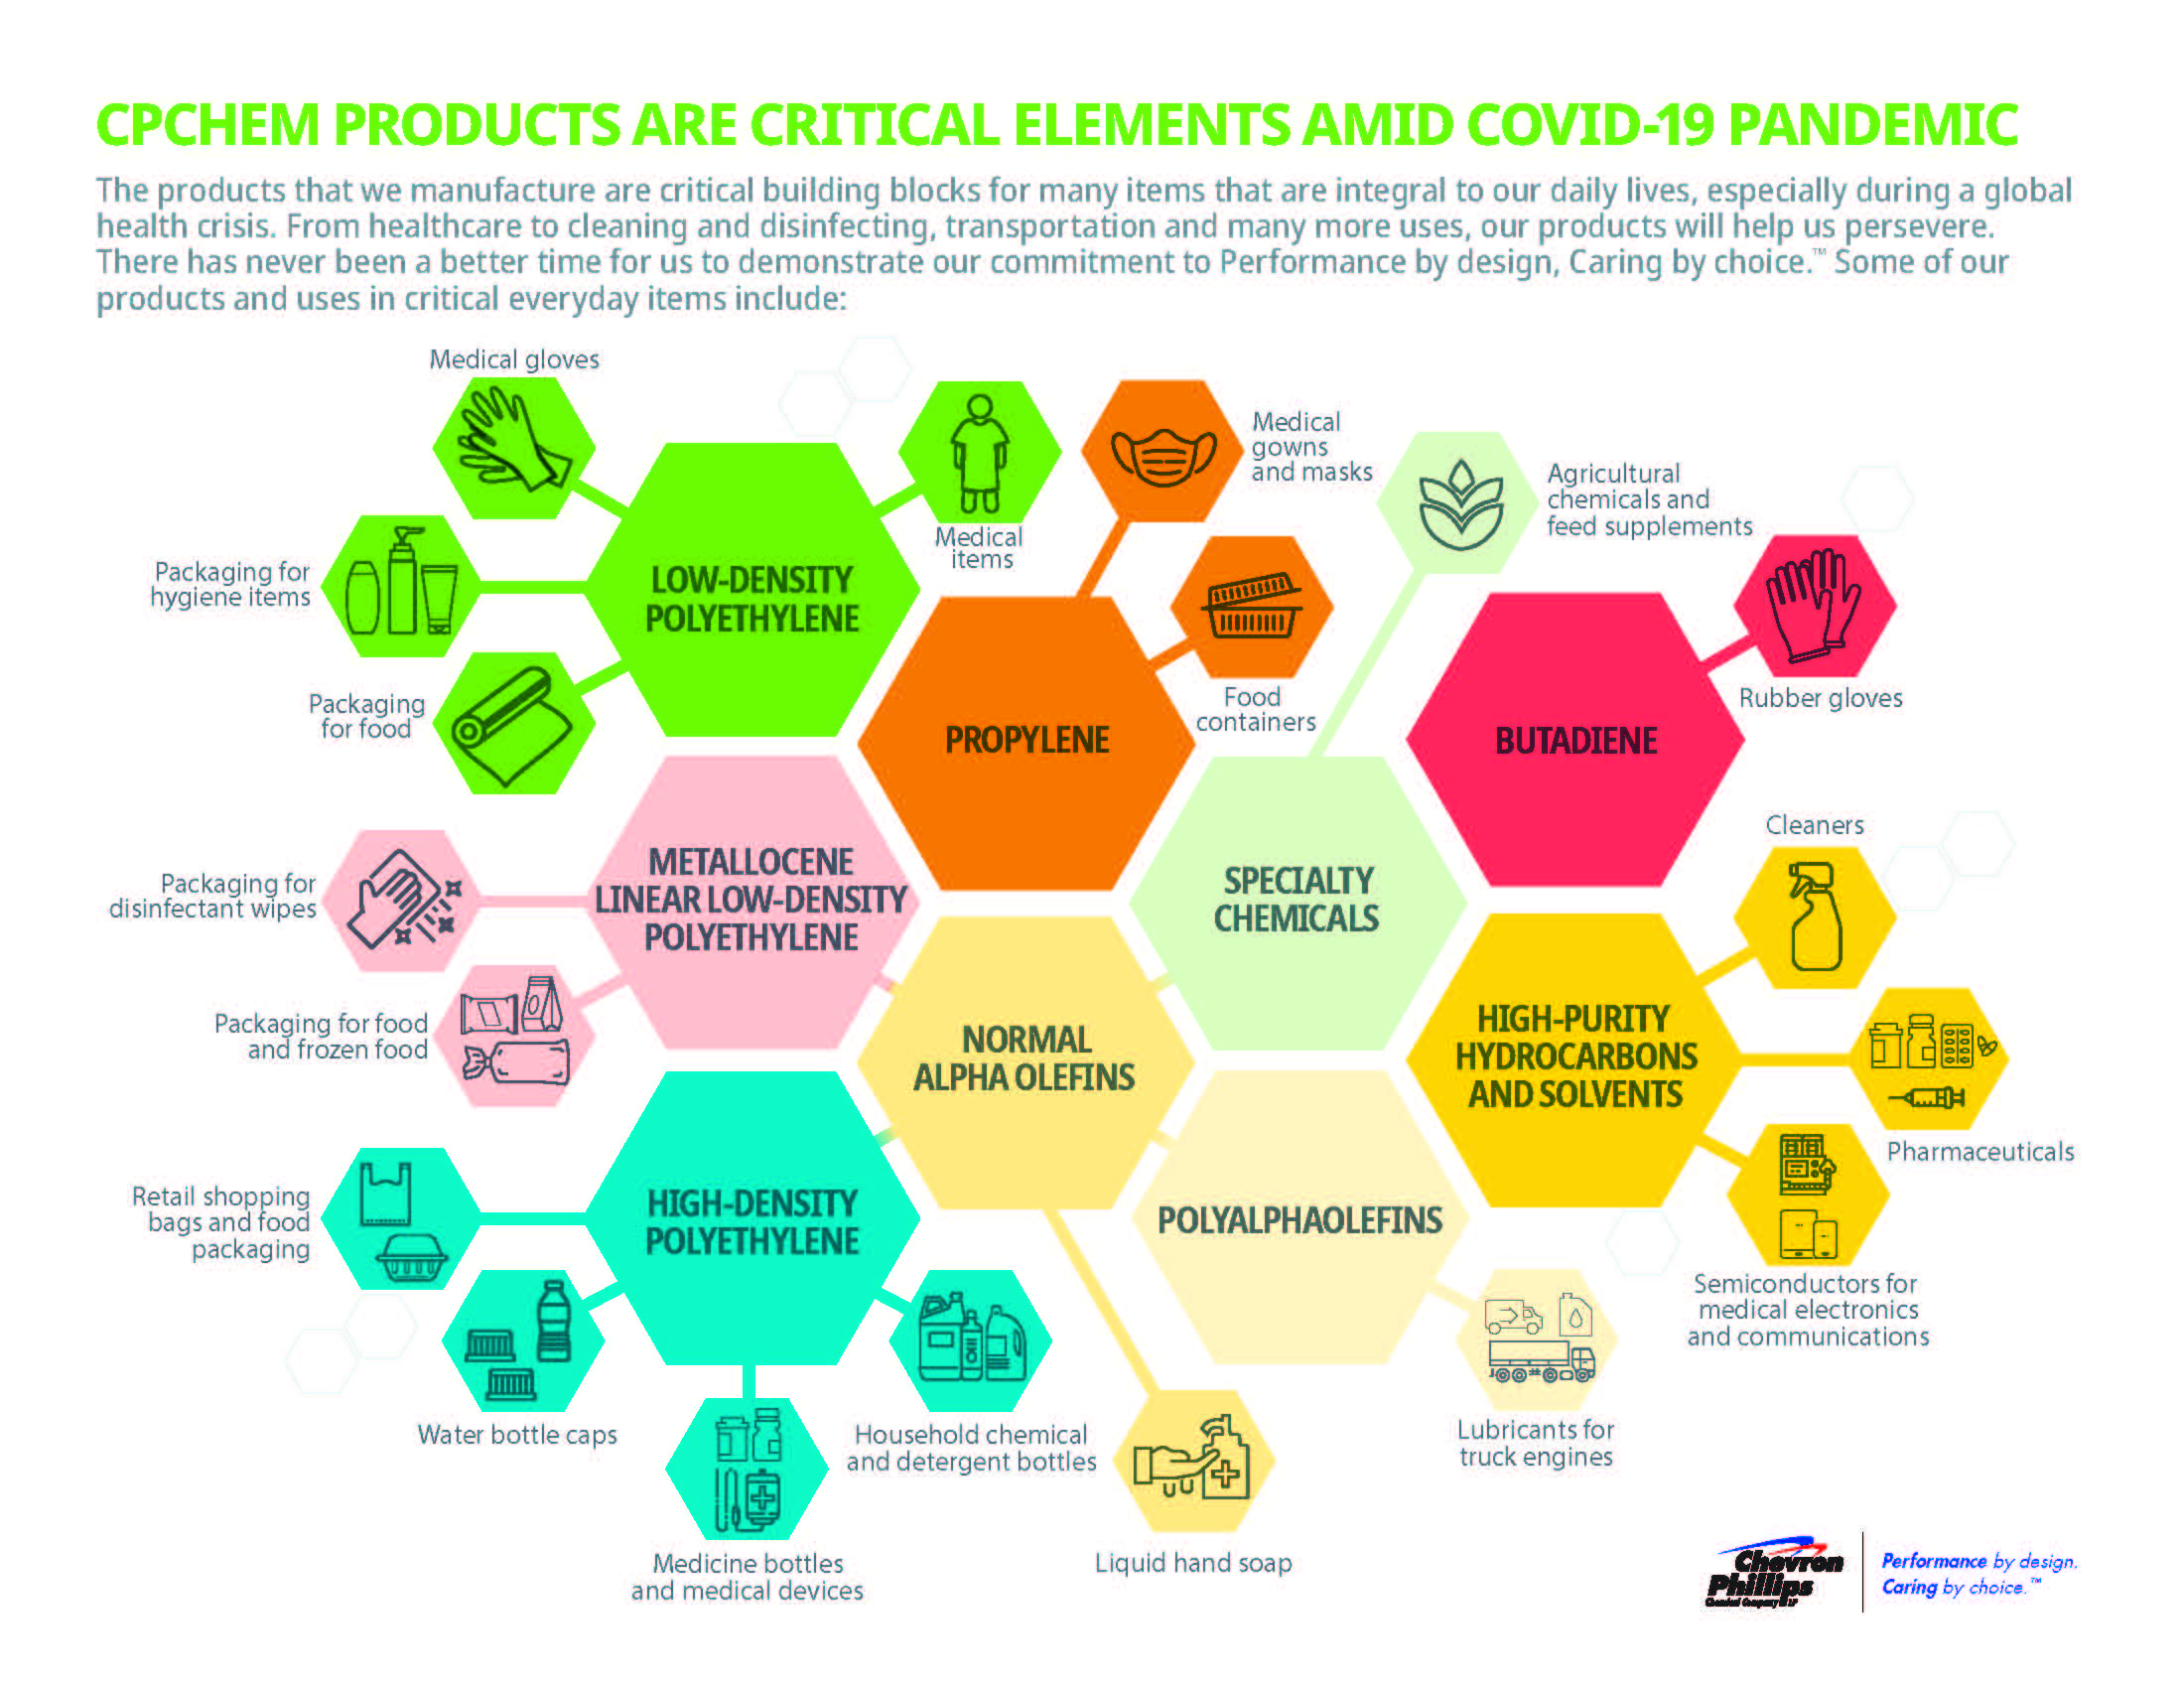 Chevron Phillips Chemical products are critical elements amid COVID-19 pandemic